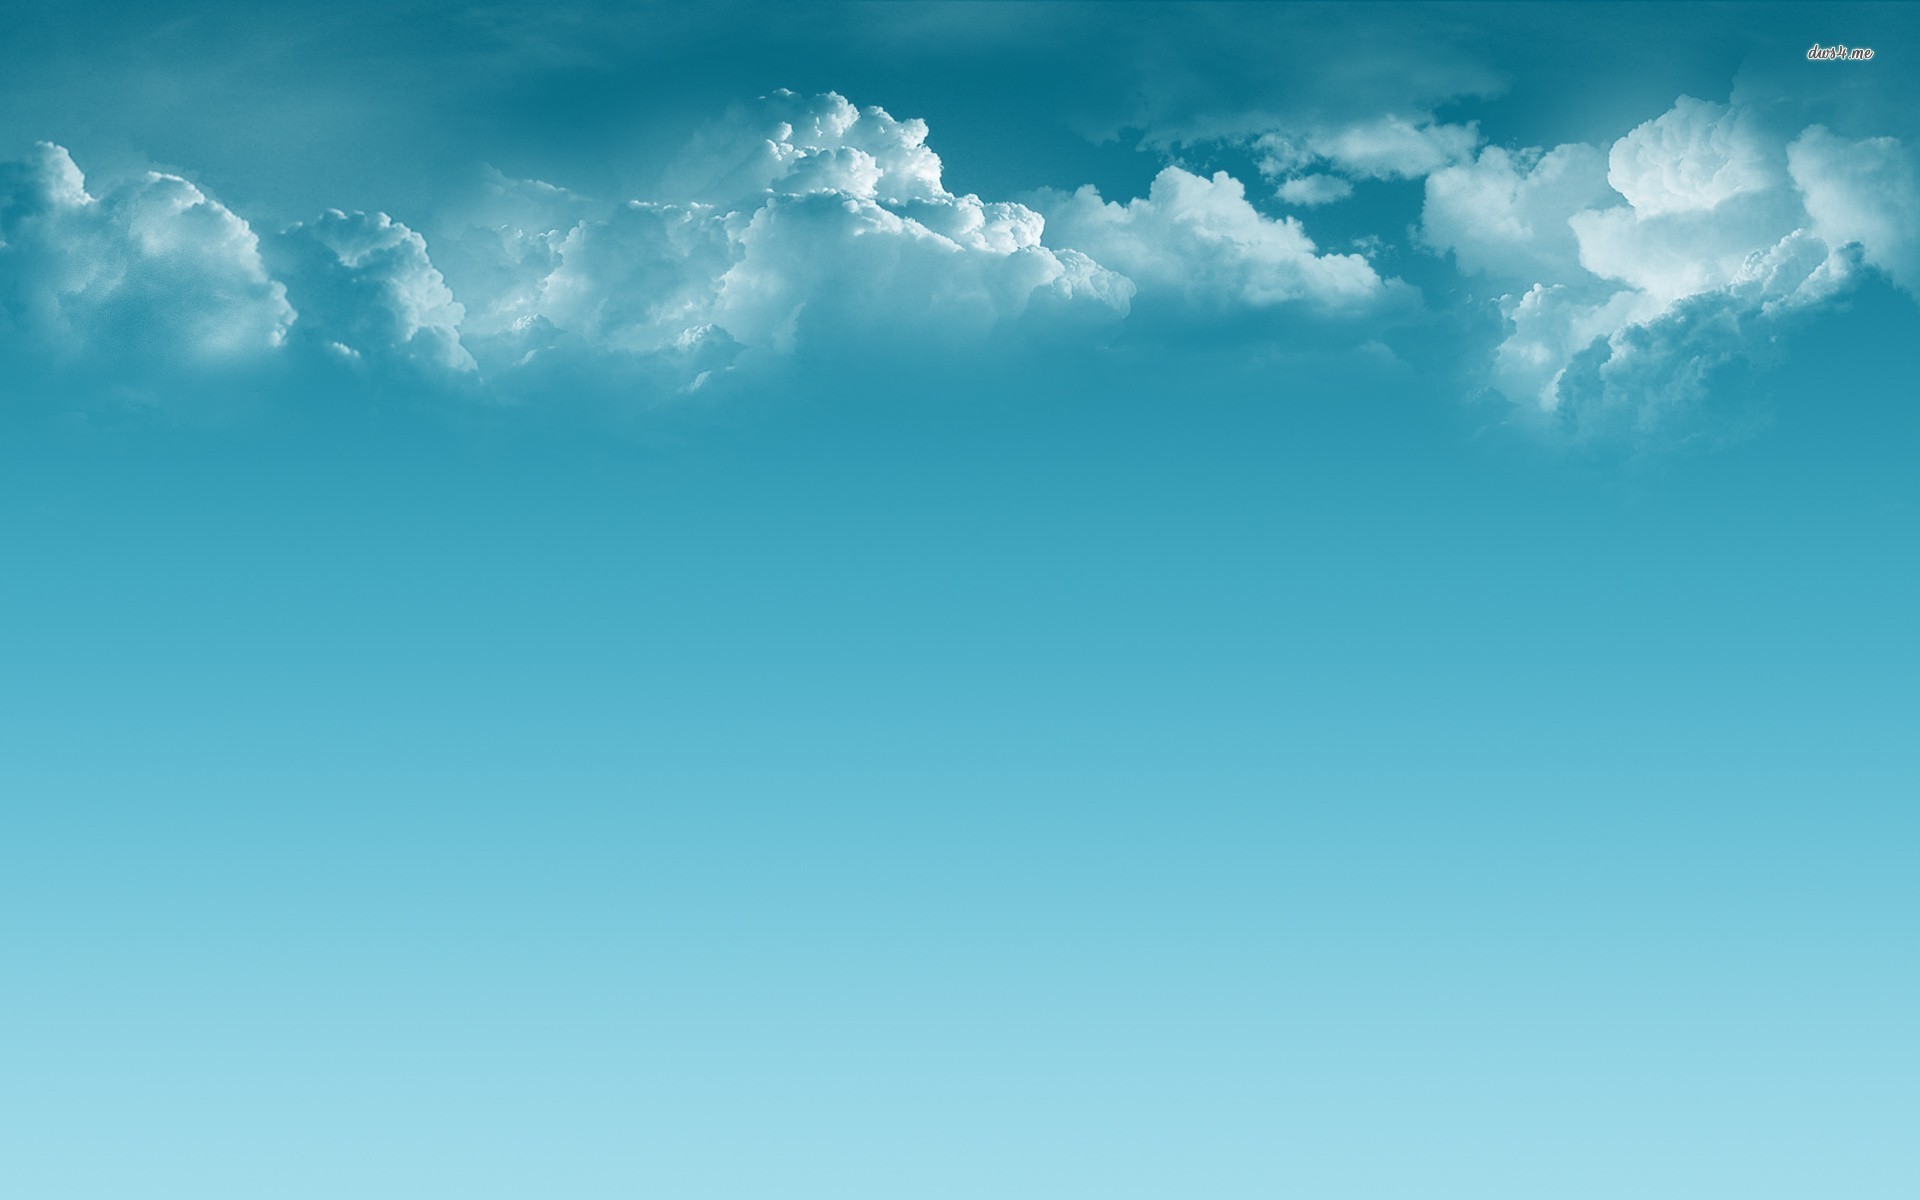 Clouds And Blue Sky Wallpaper .